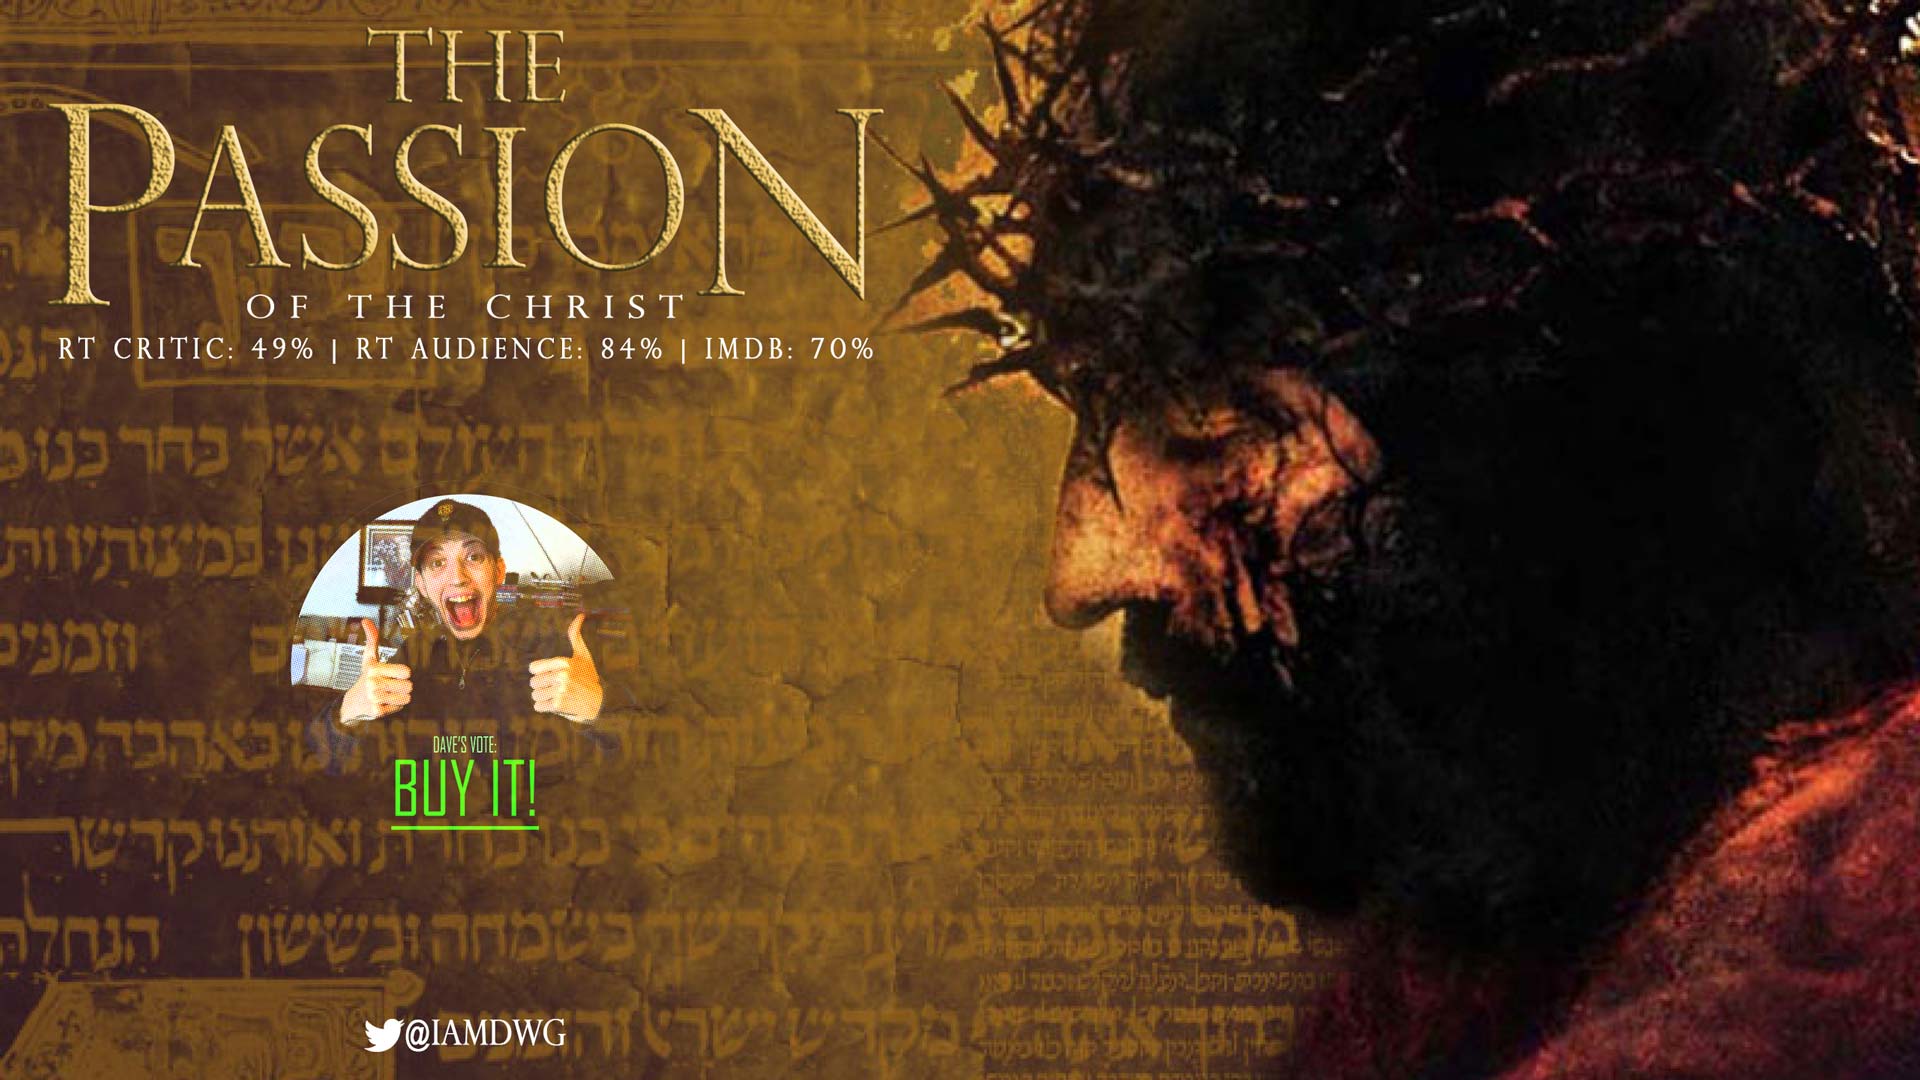 the passion of christ movie free download